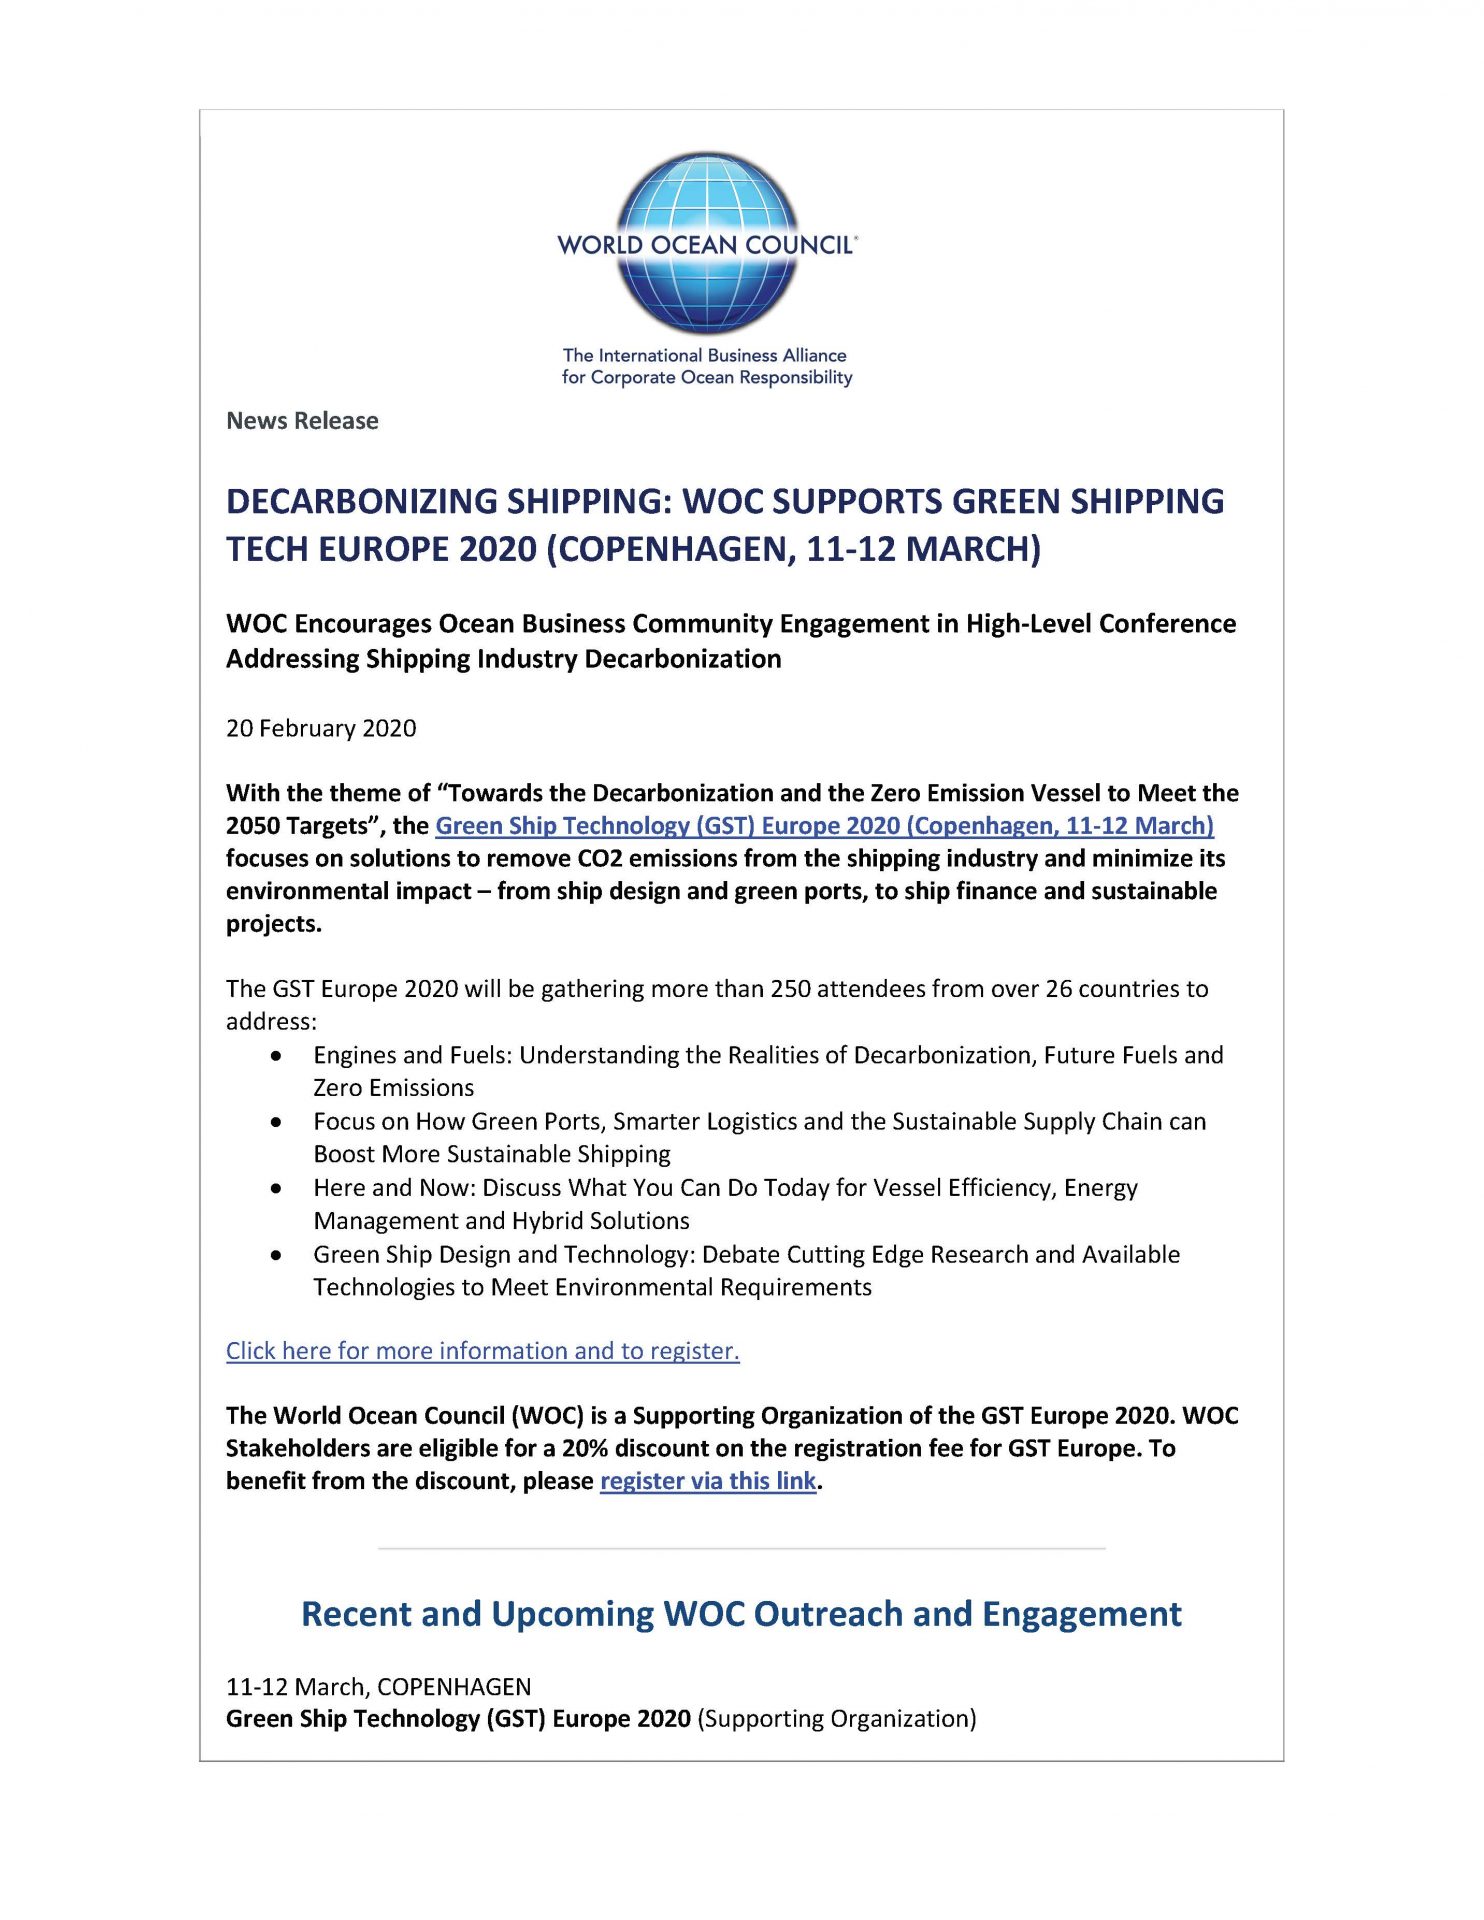 Decarbonizing Shipping: WOC Supports Green Shipping Tech Europe 2020 (Copenhagen, 11-12 March) - 20 February 2020